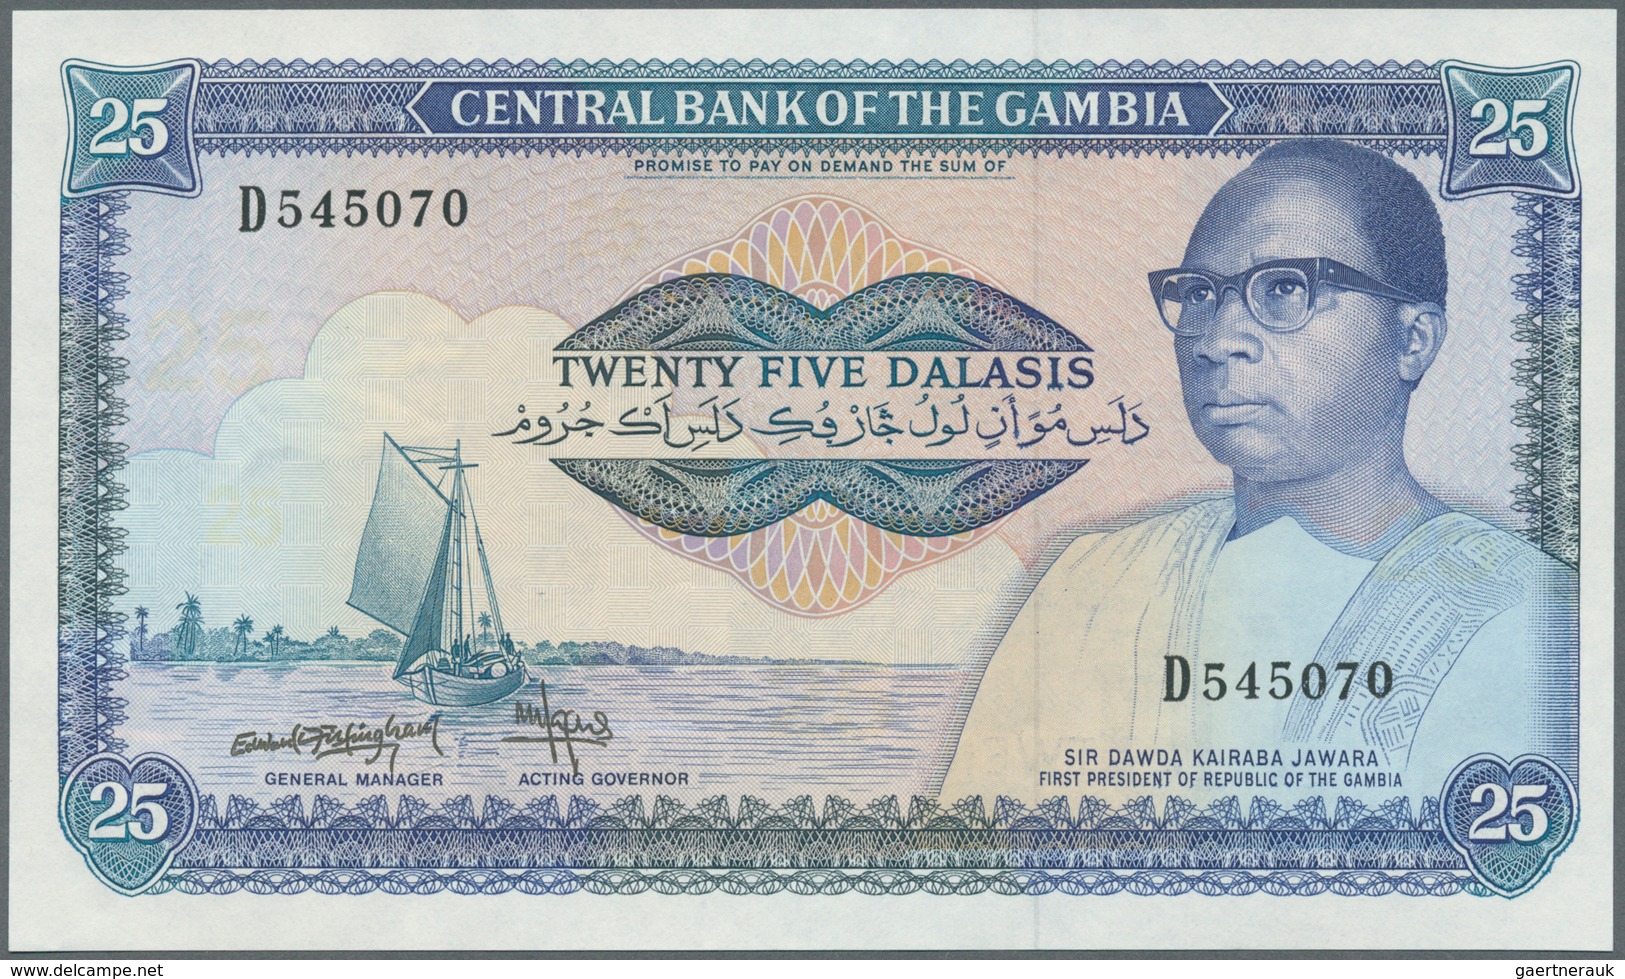 02941 Africa / Afrika: Collectors book with 122 Banknotes from Eritrea, Gambia, Ghana, Equatorial Guinea,